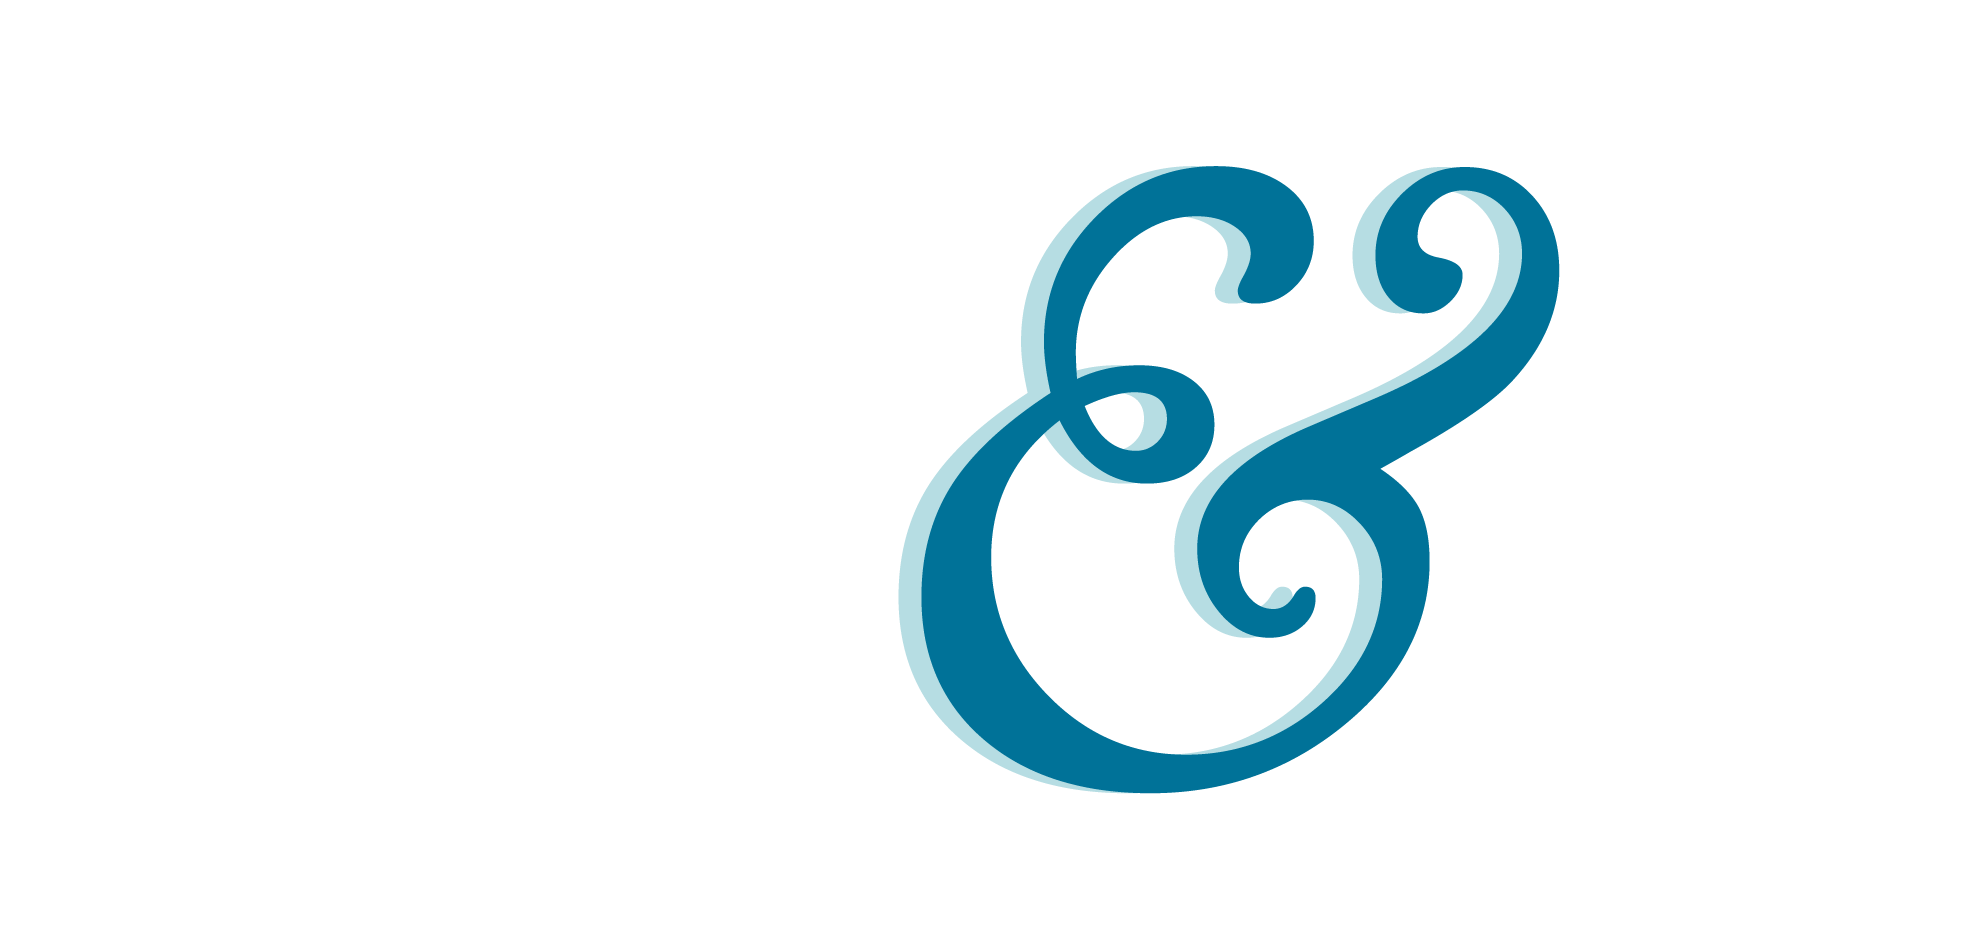 Abrevity Logo - Brevity & Wit | Strategy and design for change